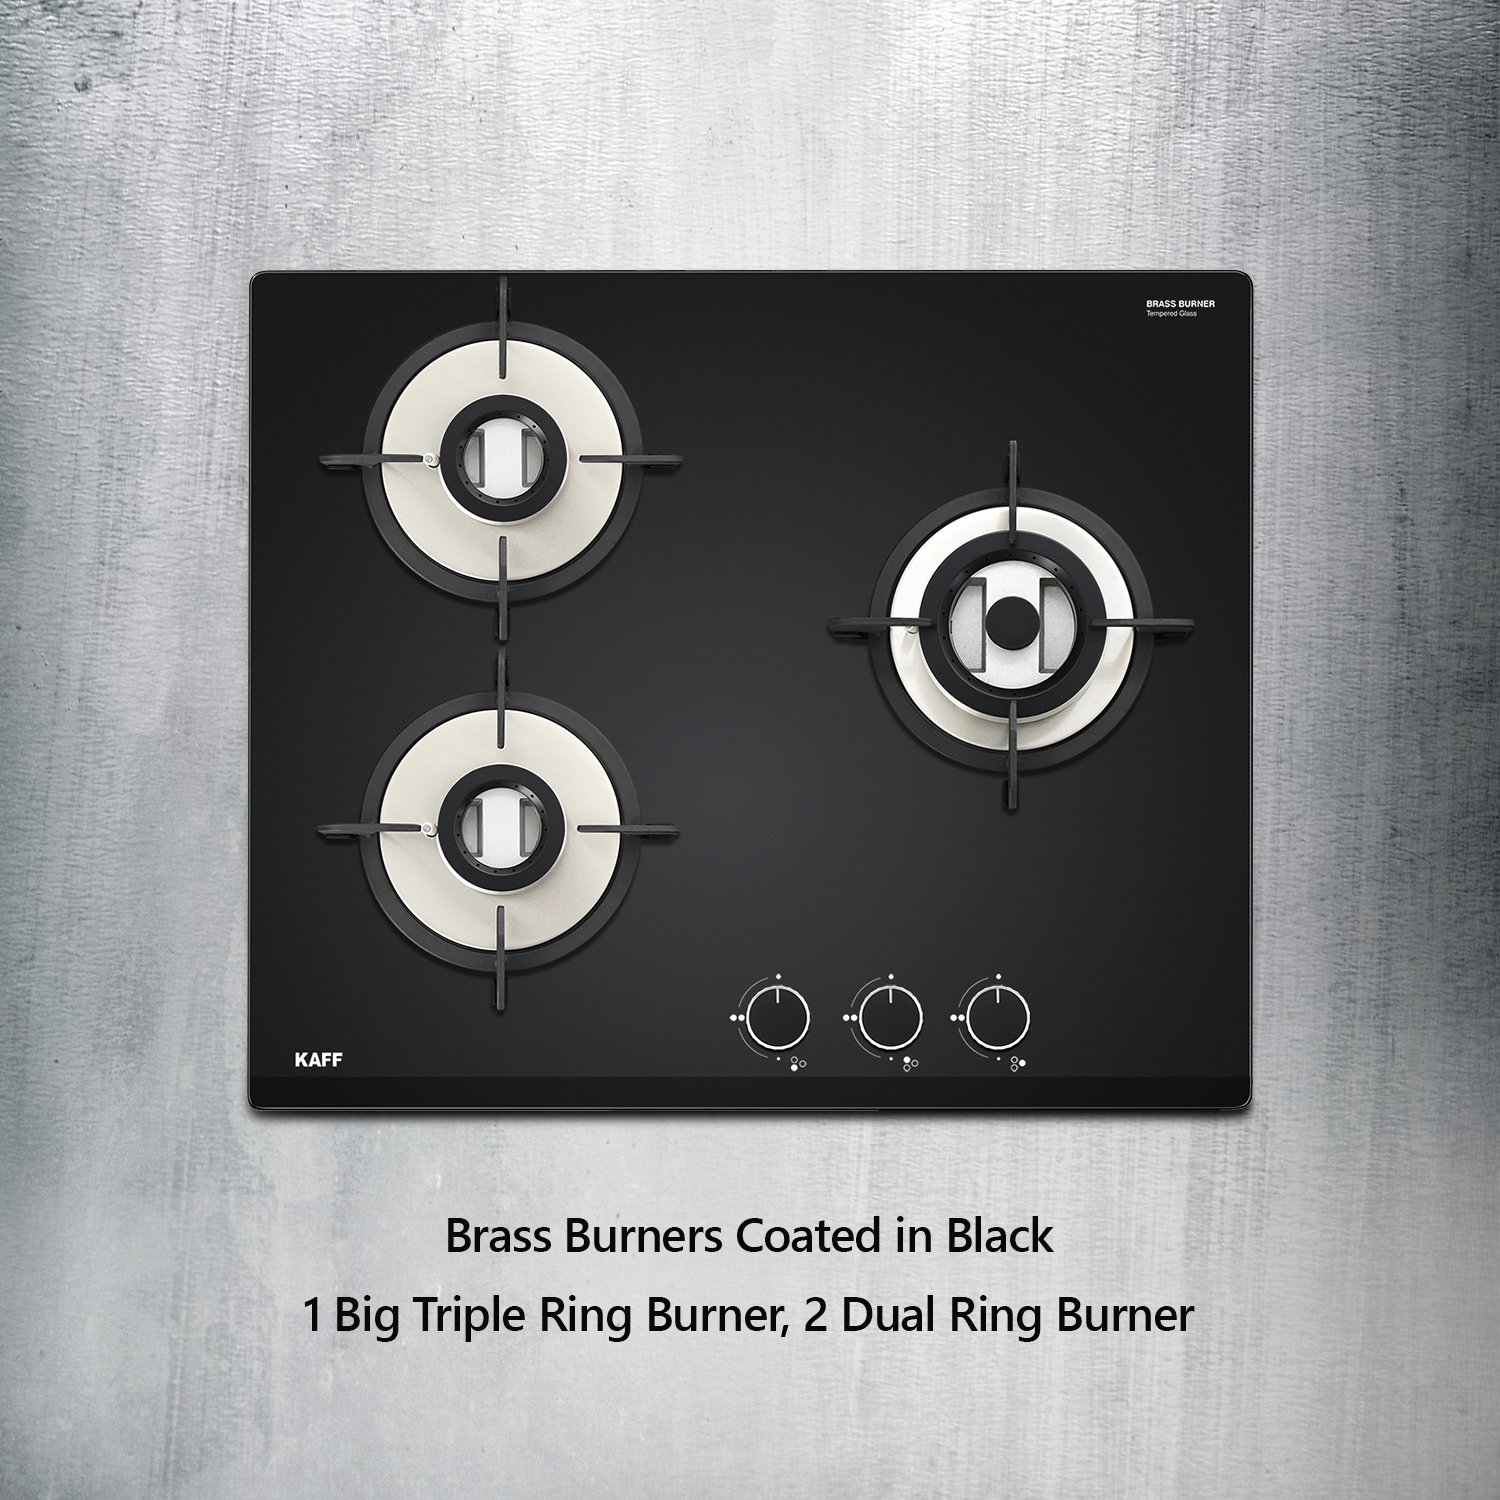 3 brass burners with 2 dual ring burner